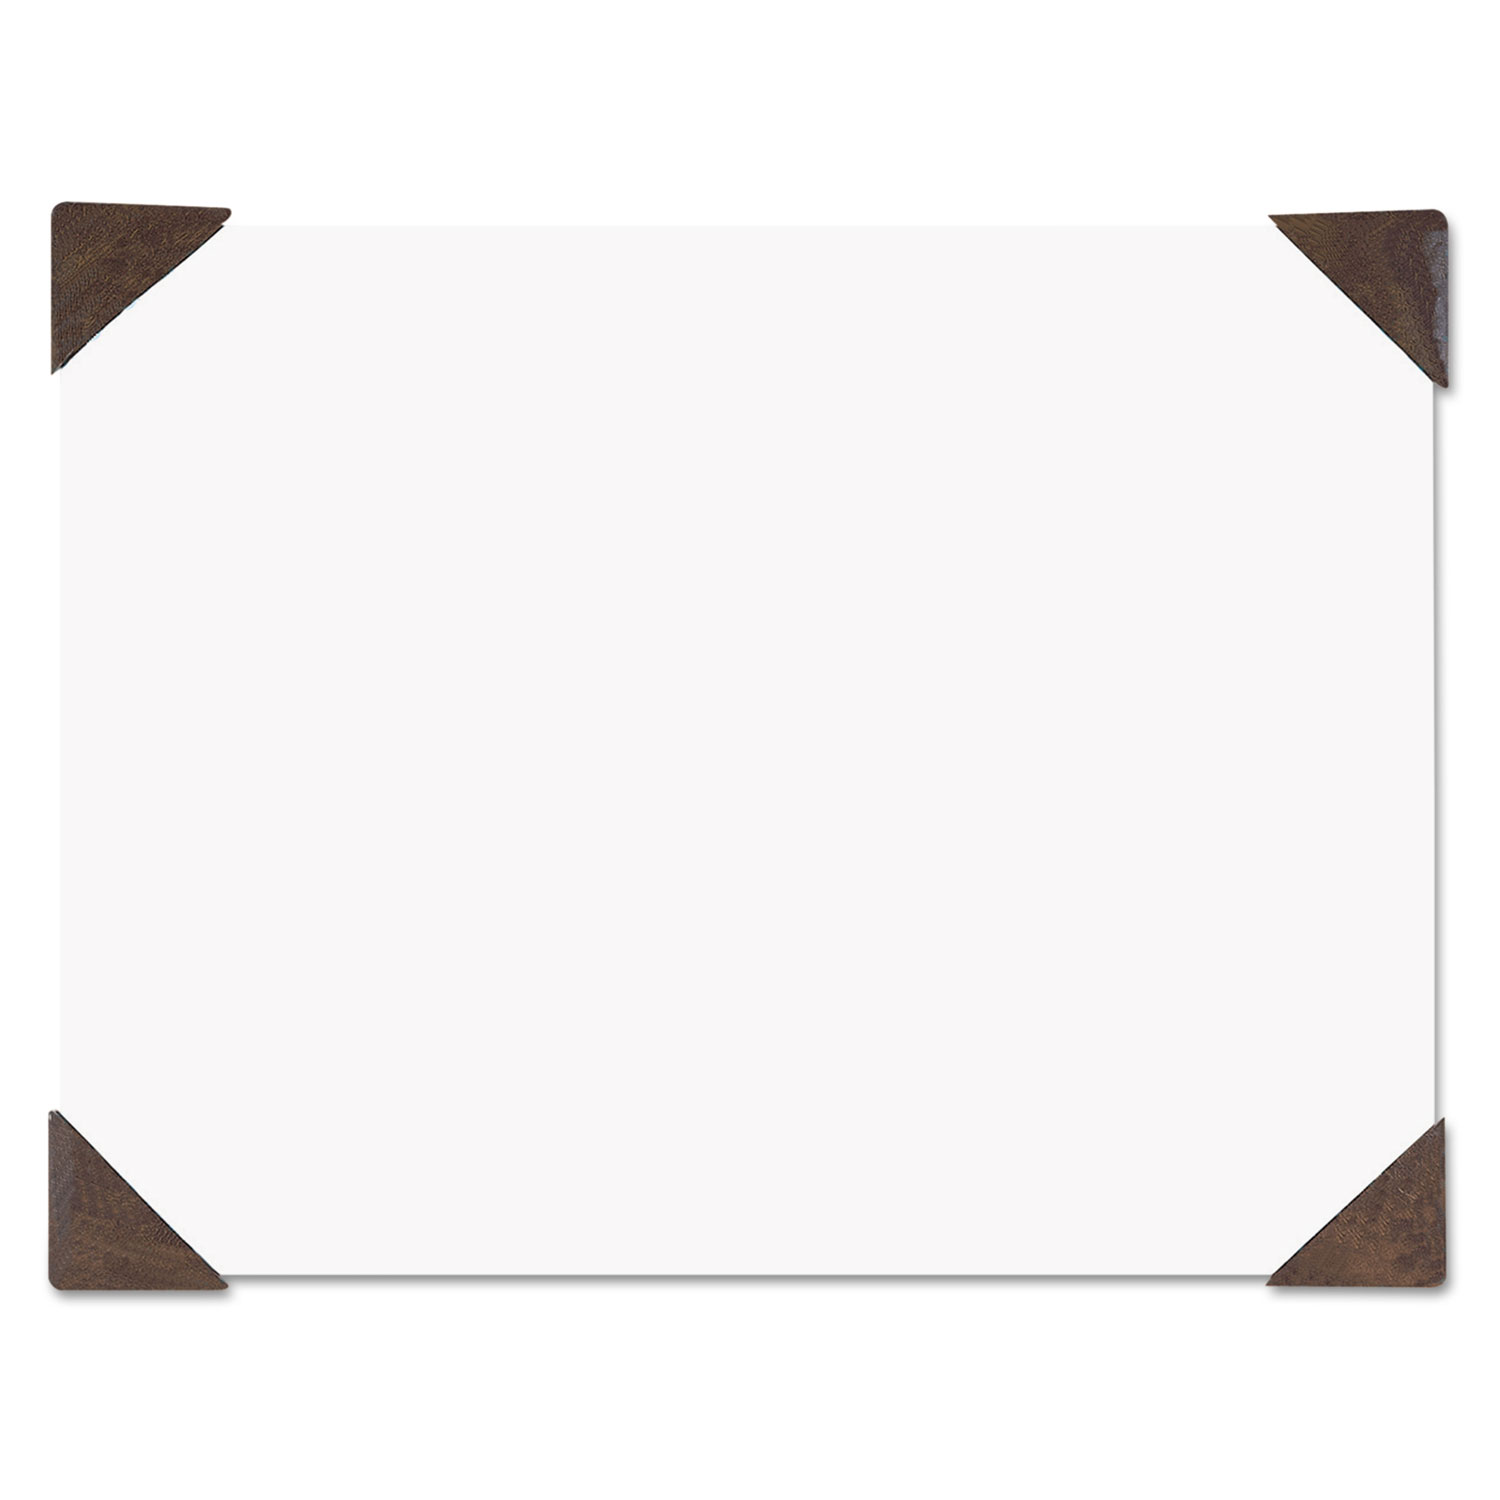 House of Doolittle HOD40003 100% Recycled Doodle Desk Pad, Unruled, 50 Sheets, Refillable, 22 x 17, Brown